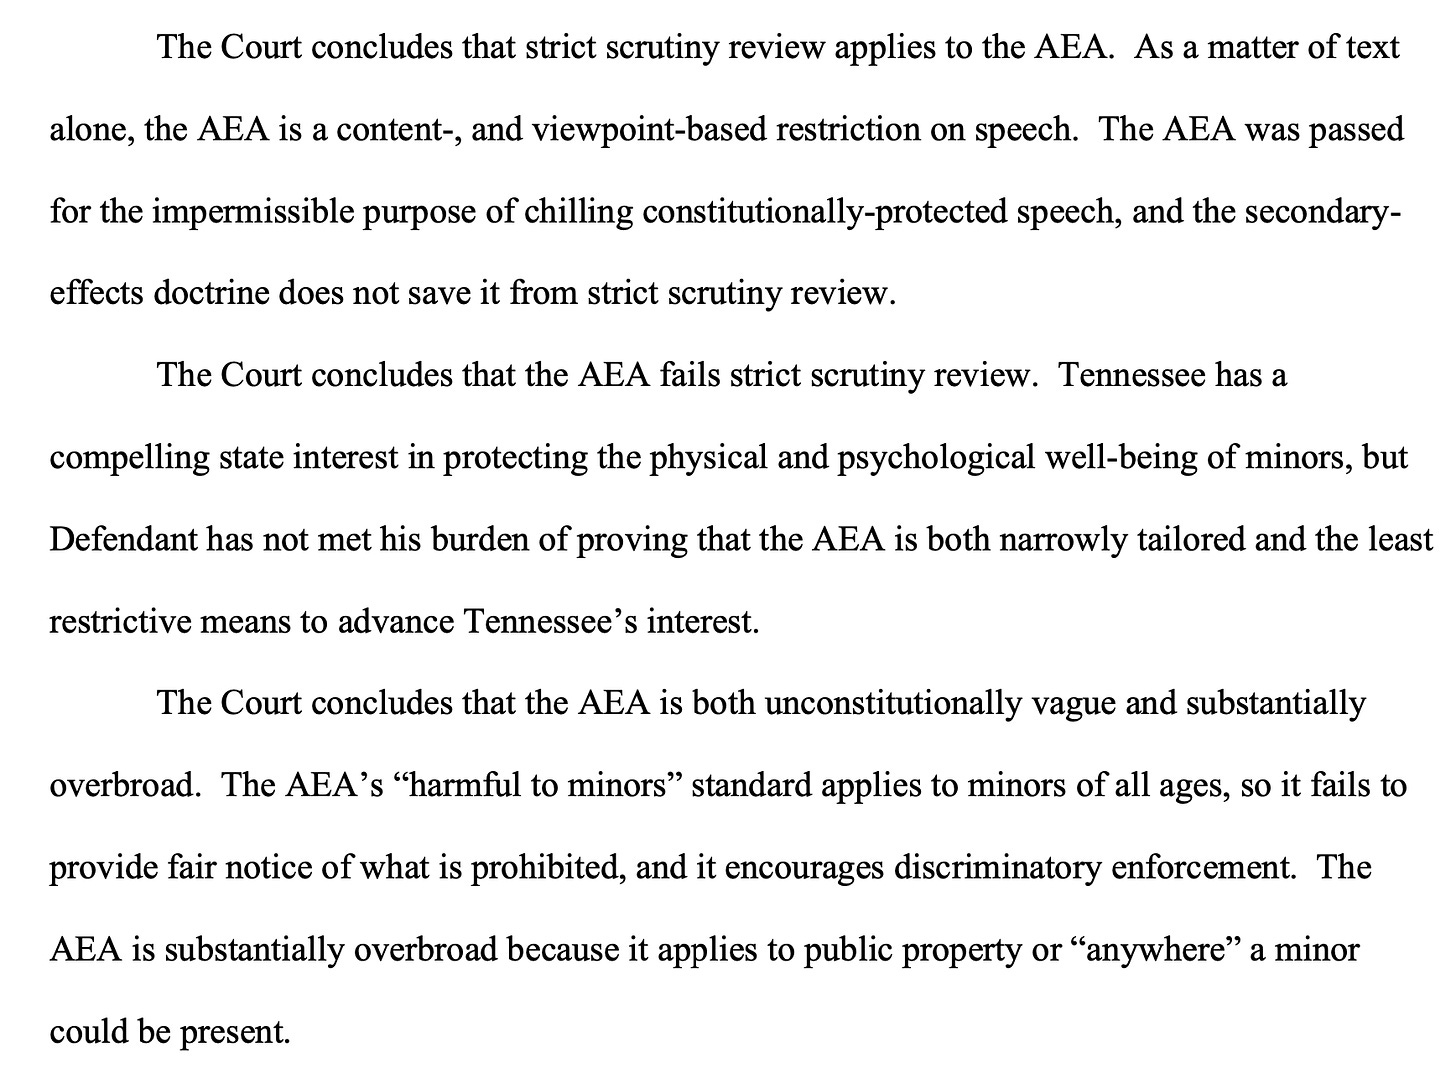 The Court concludes that strict scrutiny review applies to the AEA. As a matter of text alone, the AEA is a content-, and viewpoint-based restriction on speech. The AEA was passed for the impermissible purpose of chilling constitutionally-protected speech, and the secondary- effects doctrine does not save it from strict scrutiny review. The Court concludes that the AEA fails strict scrutiny review. Tennessee has a compelling state interest in protecting the physical and psychological well-being of minors, but Defendant has not met his burden of proving that the AEA is both narrowly tailored and the least restrictive means to advance Tennessee’s interest. The Court concludes that the AEA is both unconstitutionally vague and substantially overbroad. The AEA’s “harmful to minors” standard applies to minors of all ages, so it fails to provide fair notice of what is prohibited, and it encourages discriminatory enforcement. The AEA is substantially overbroad because it applies to public property or “anywhere” a minor could be present.